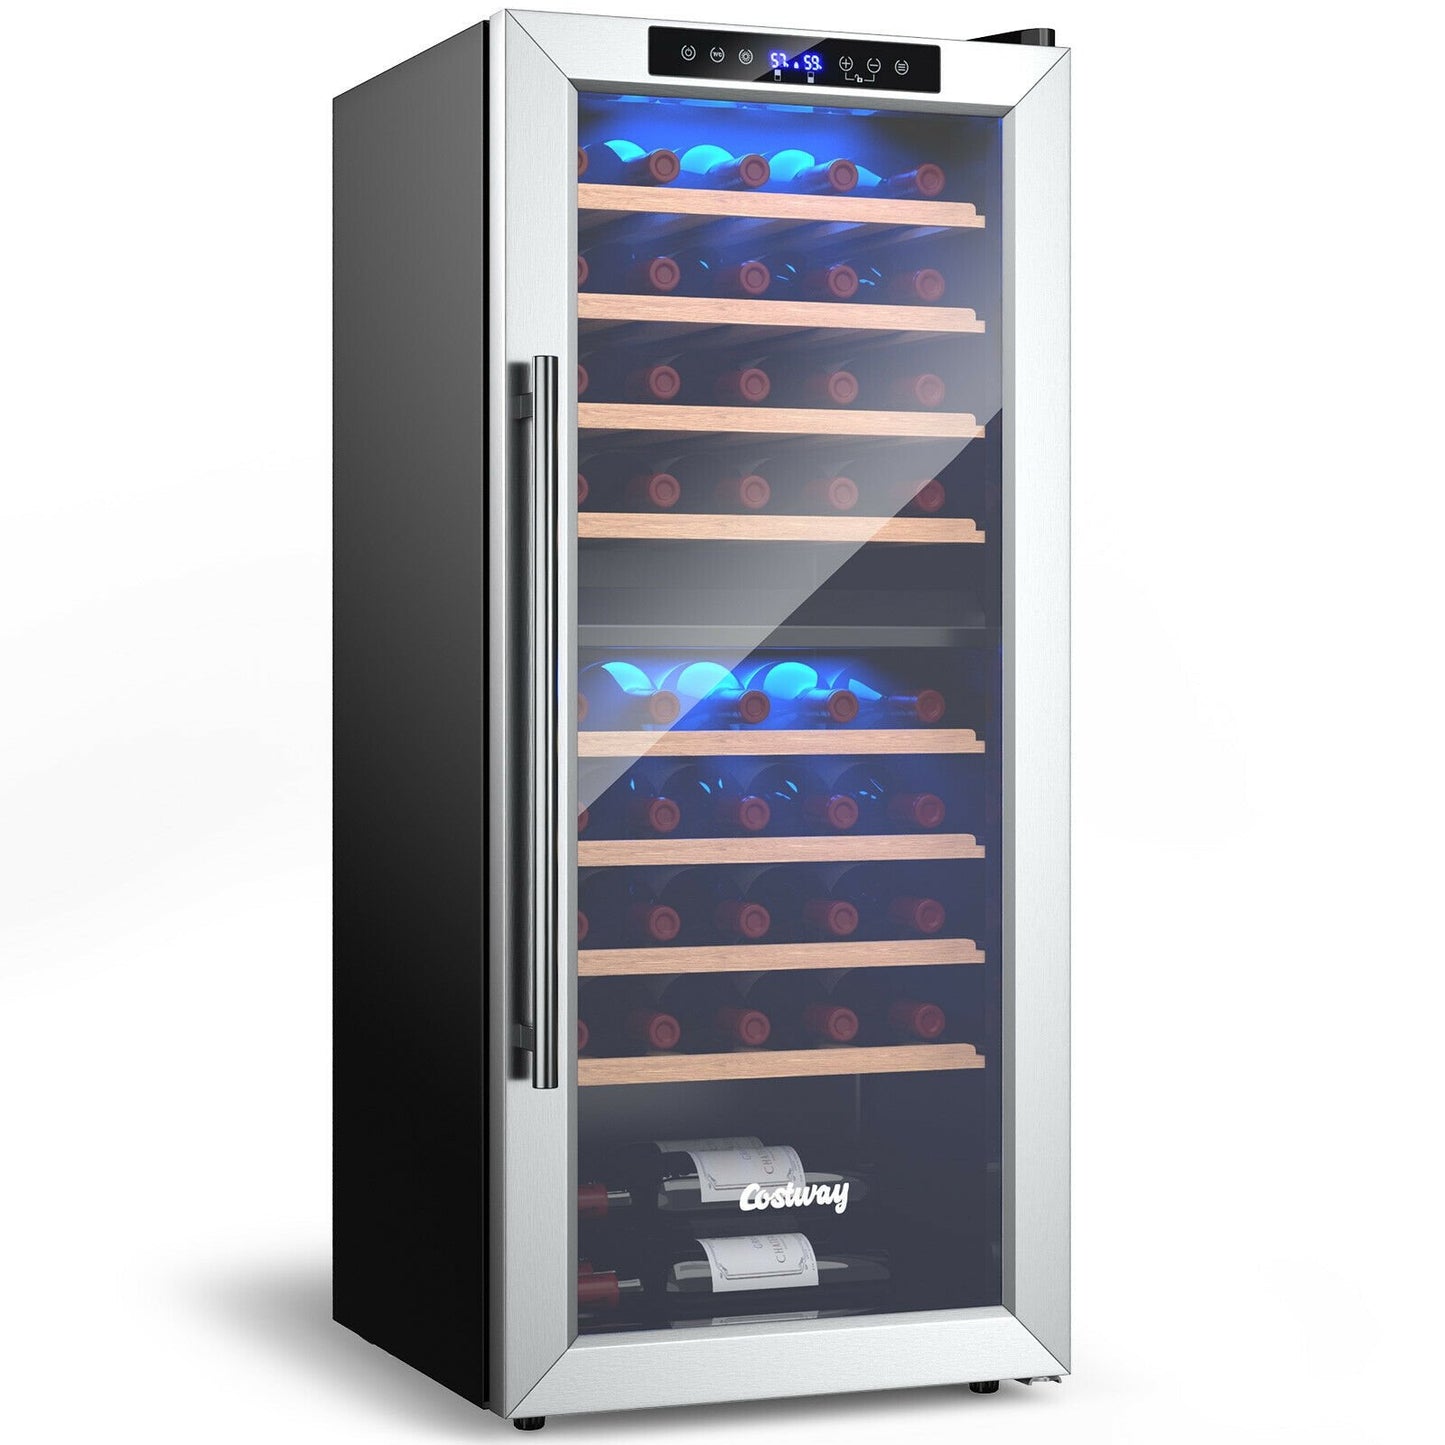 43 Bottle Wine Cooler Refrigerator Dual Zone Temperature Control with 8 Shelves, Black